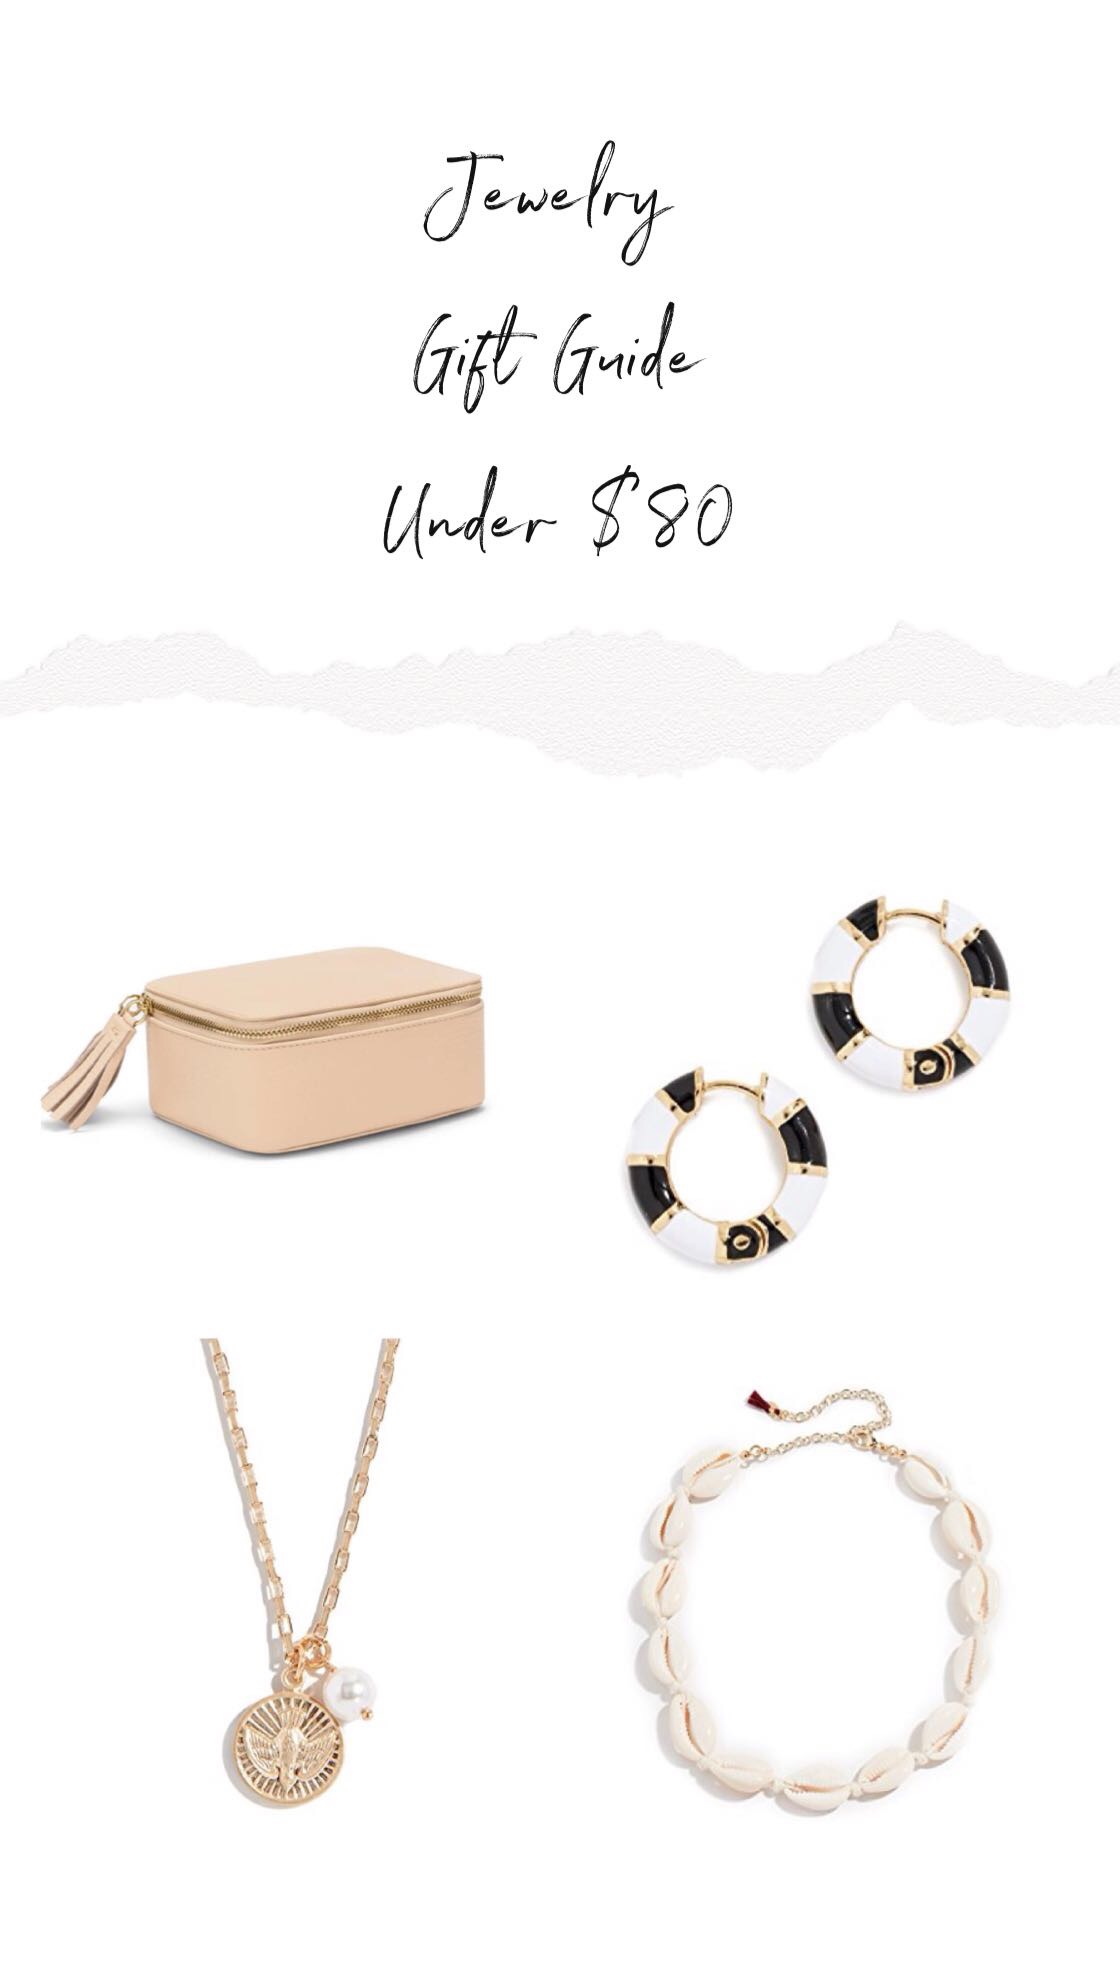 Holiday jewelry gift guide Under $80 - Find ideas for your best friends and your family with a selection of trendy jewels under $80